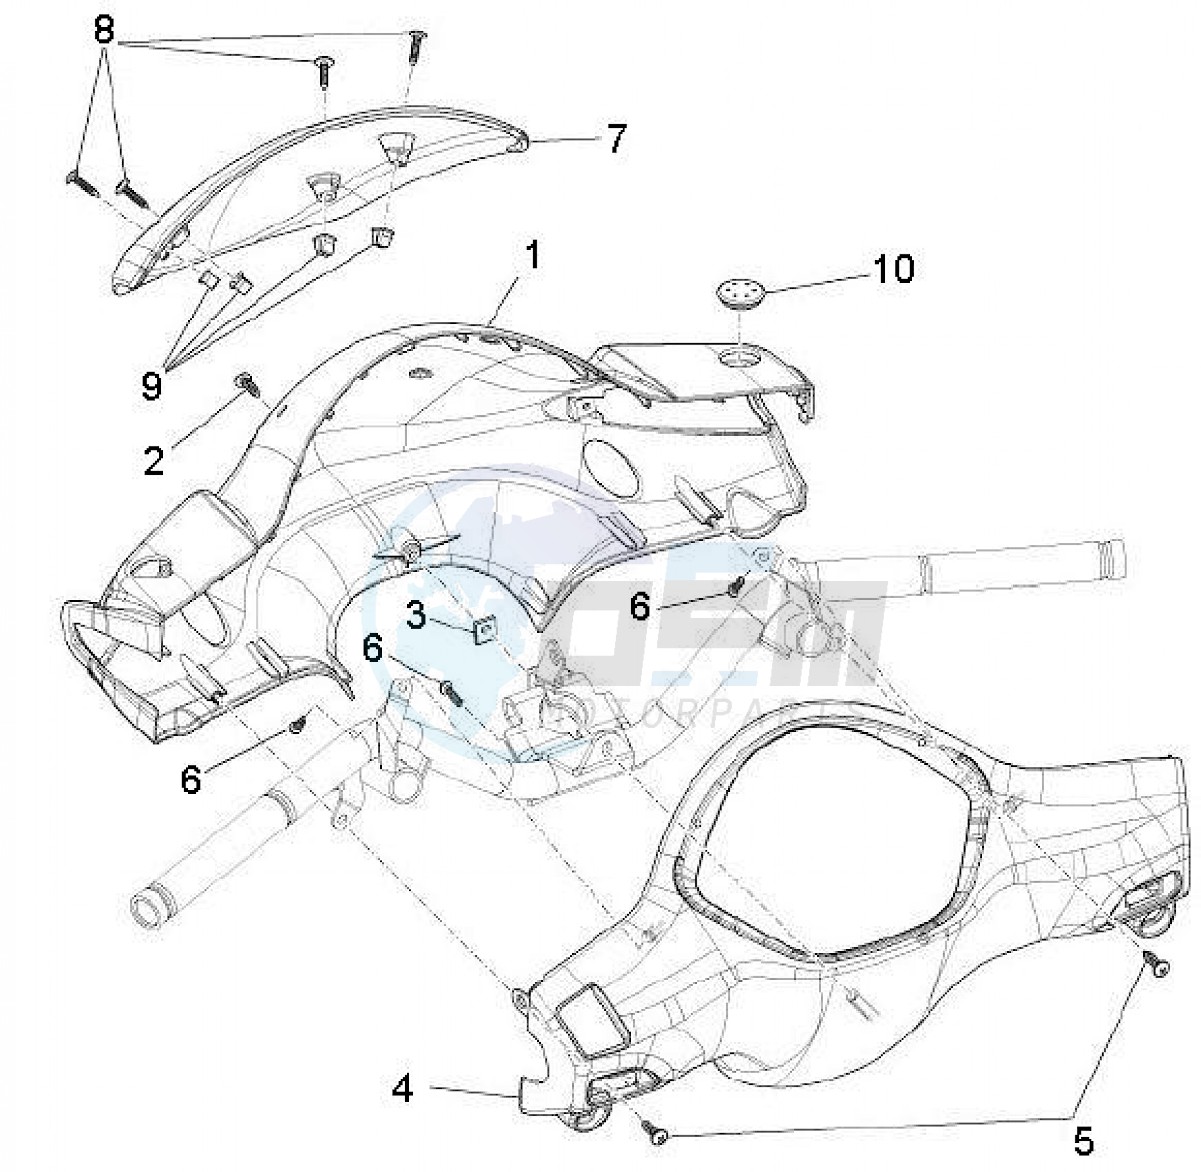 Handlebars coverages (Positions) image